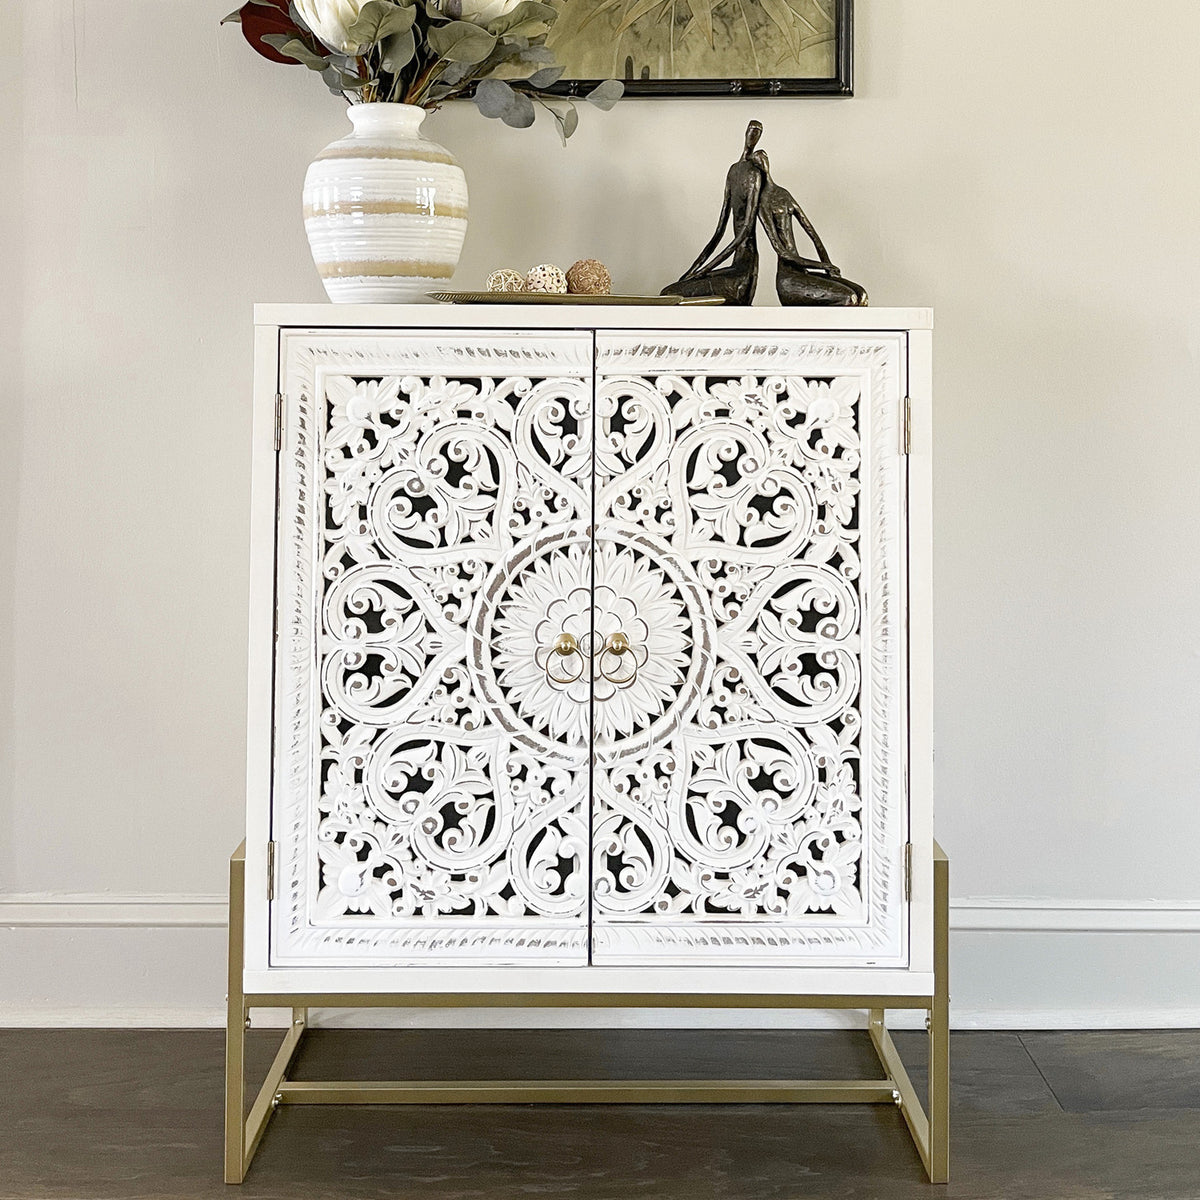 This white wooden cabinet has ornate details and a gold base.